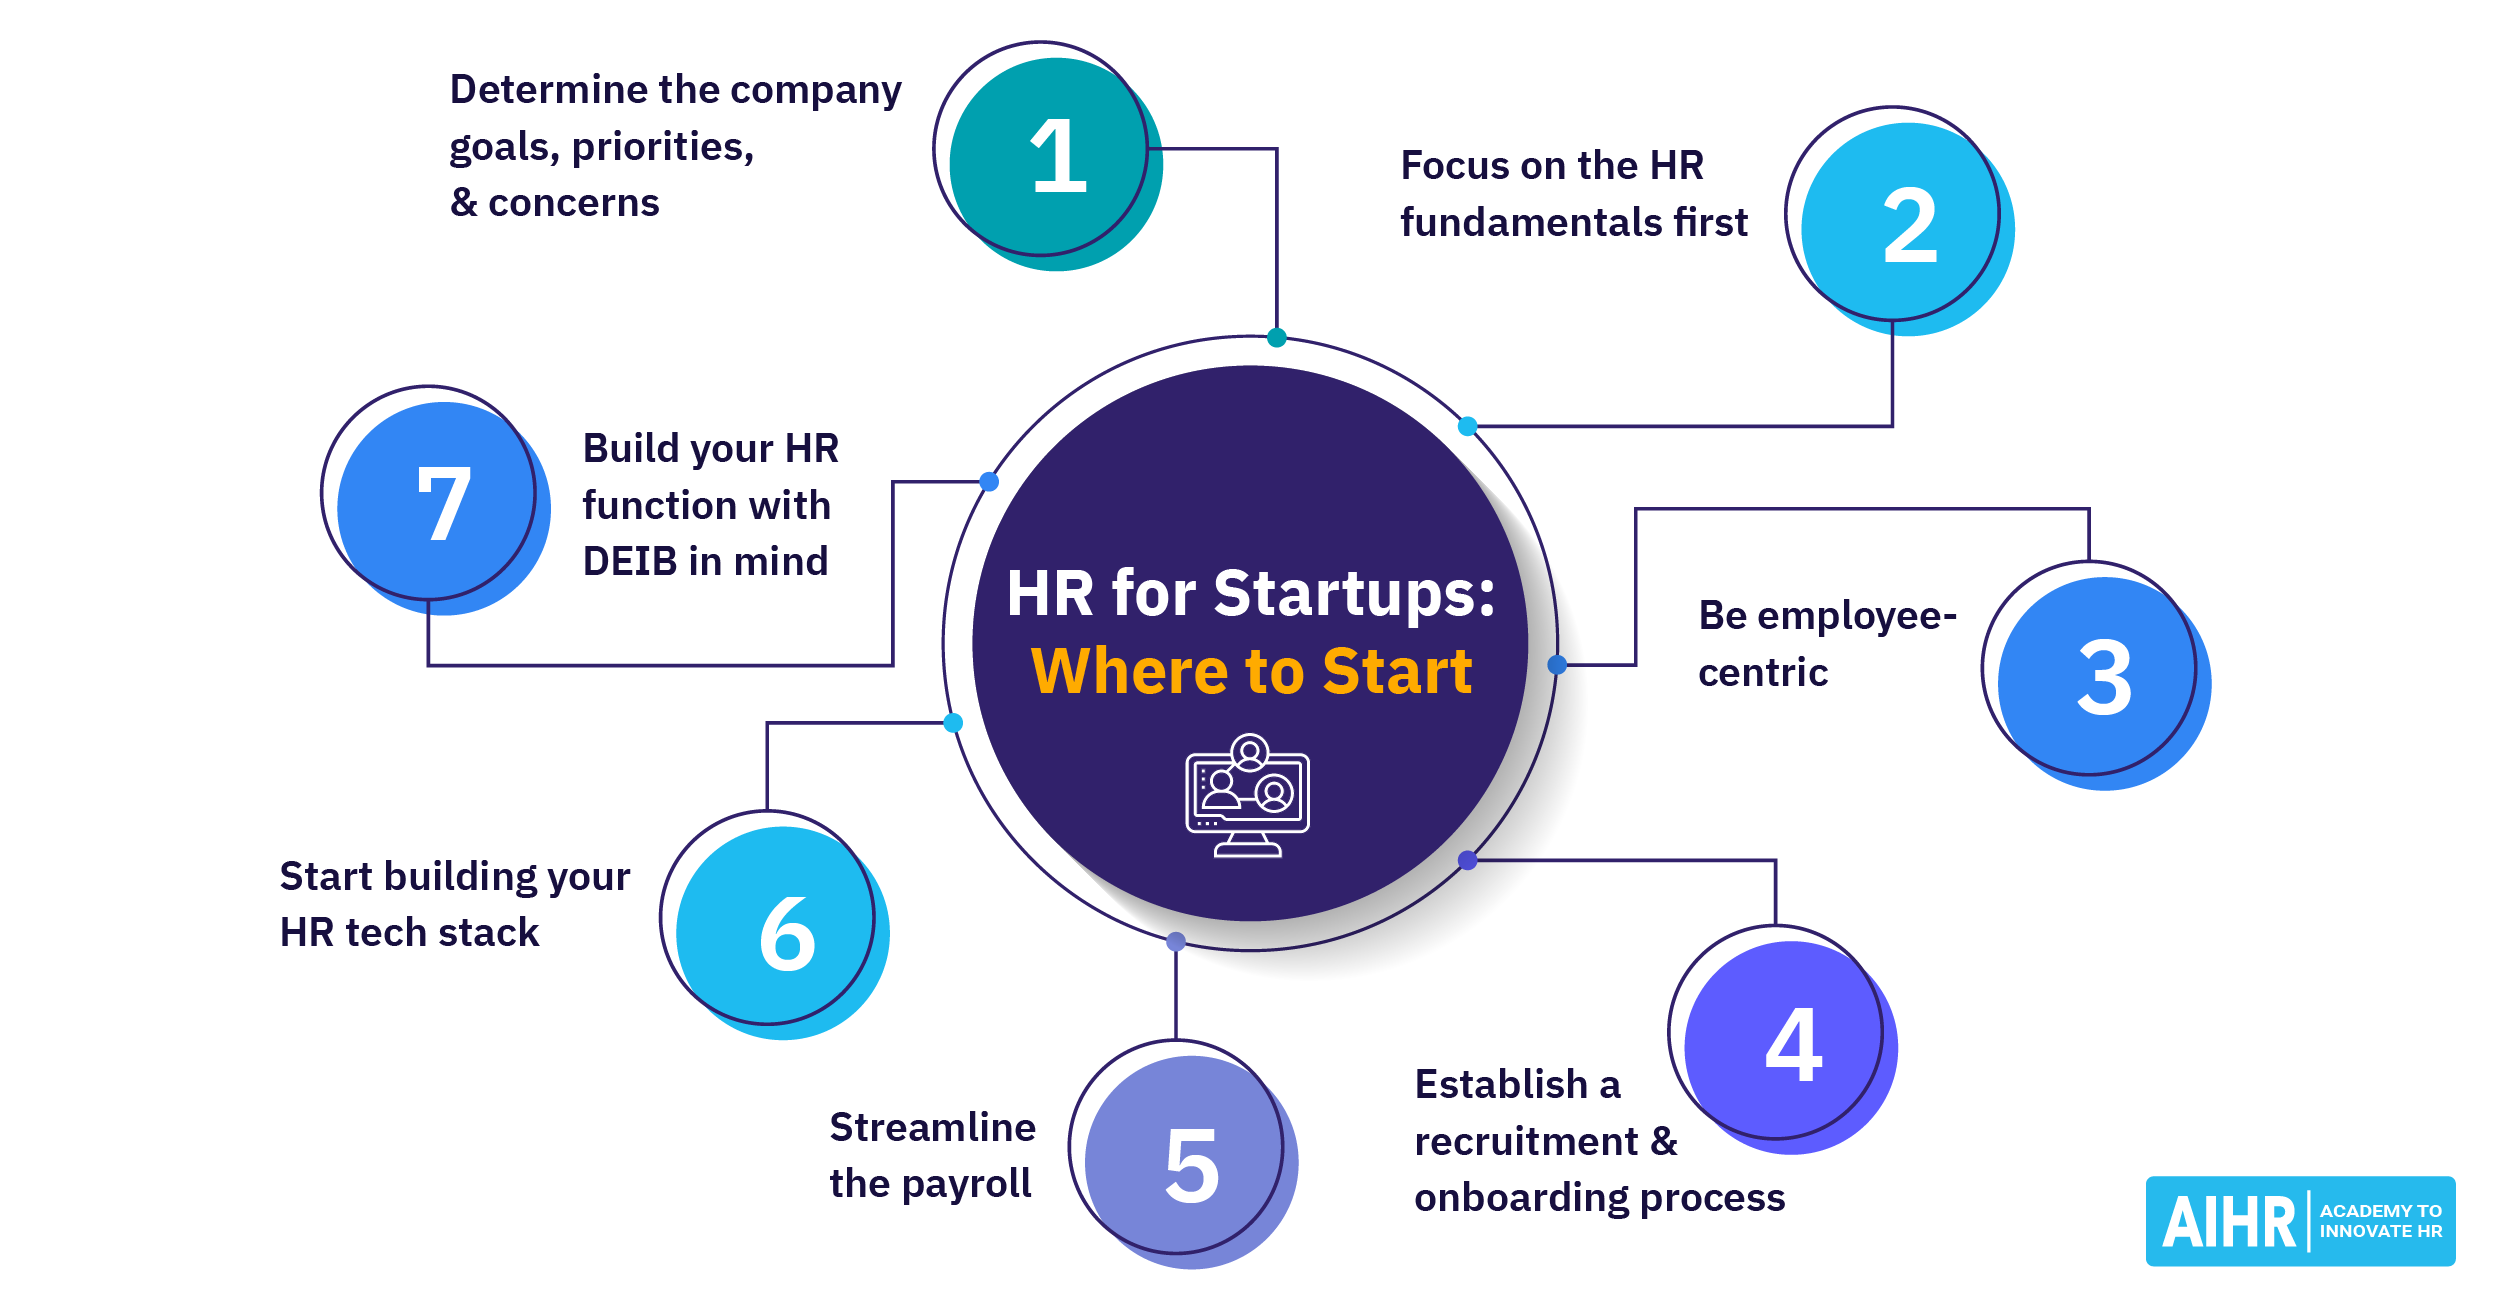 The role of HR professionals in startups